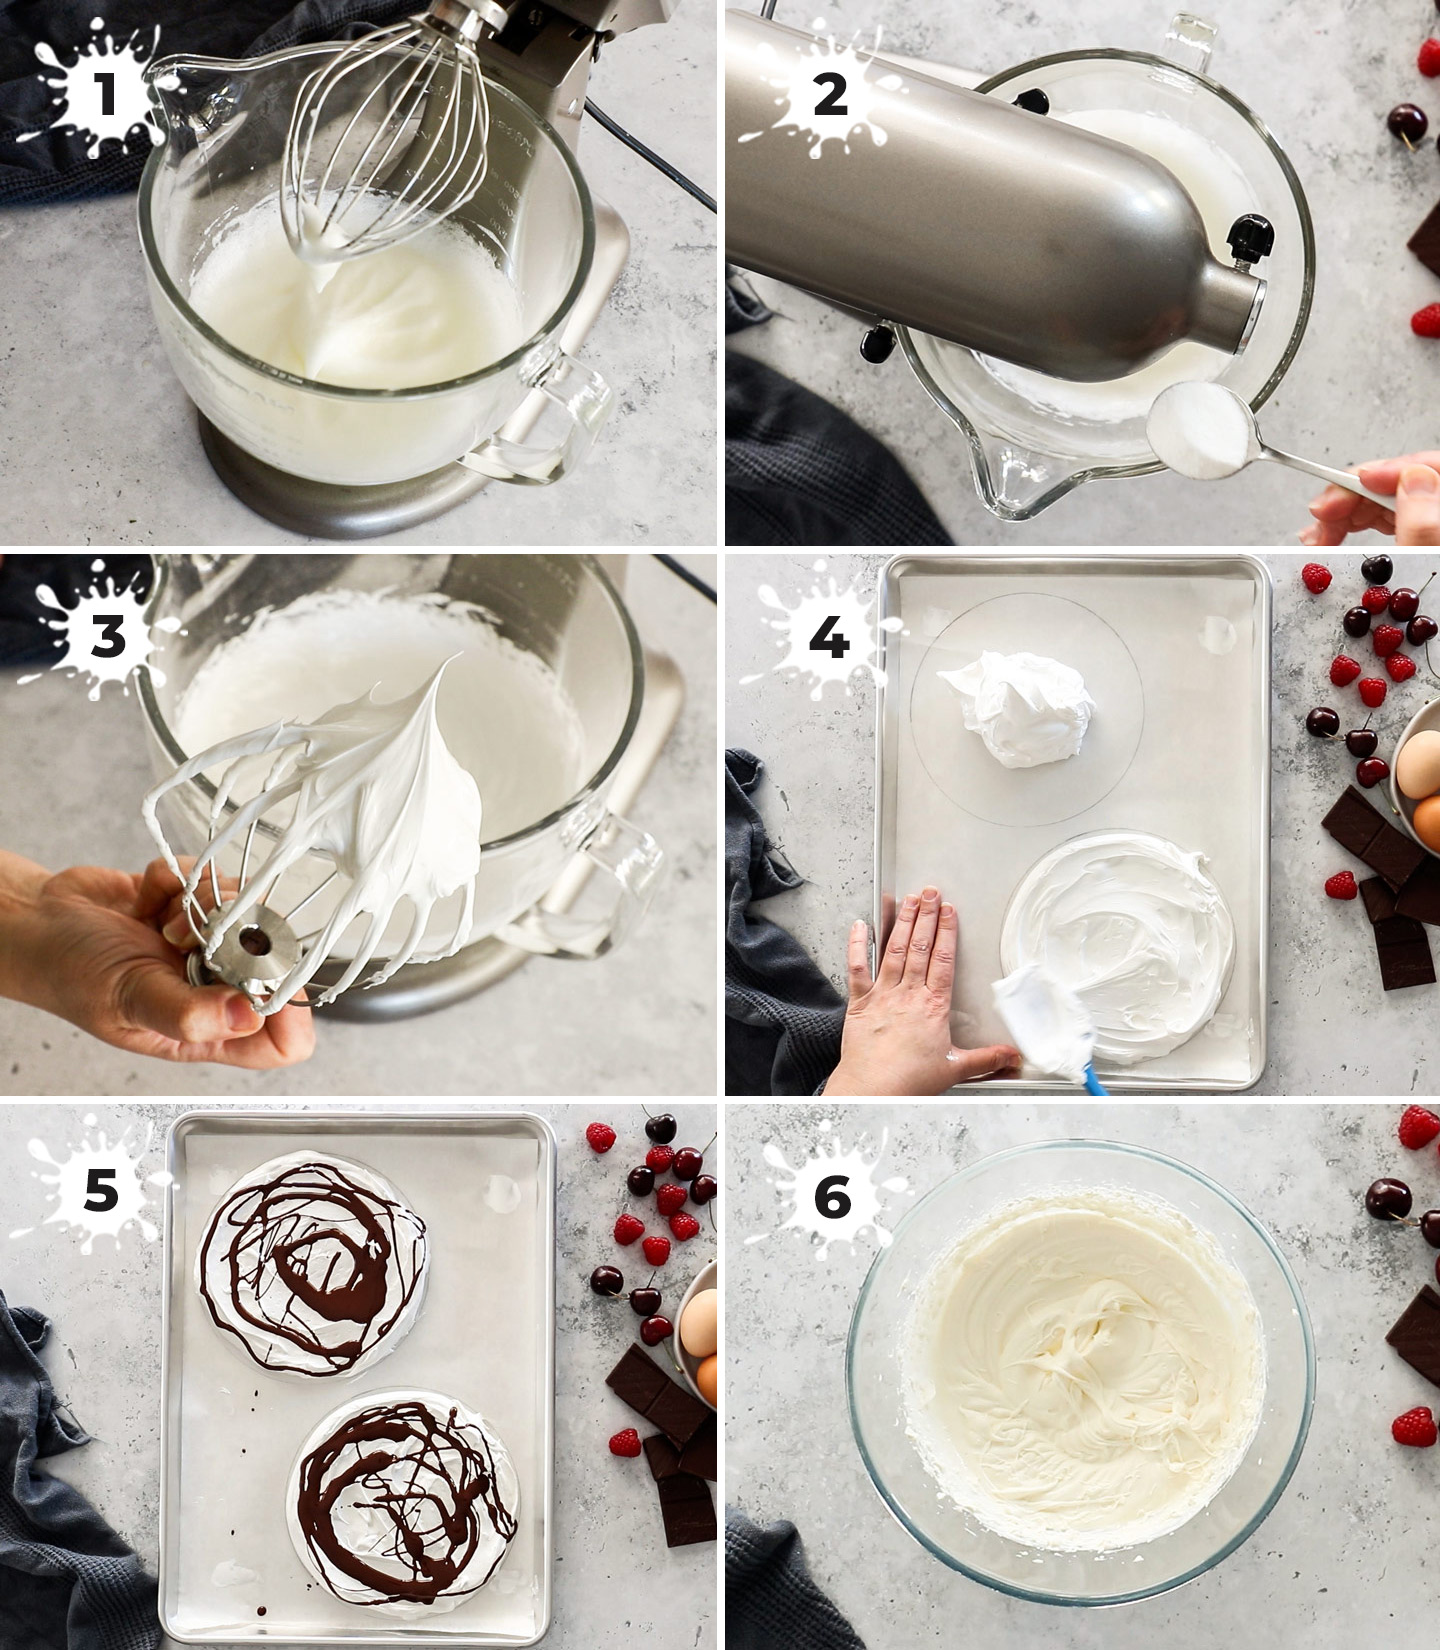 A collage showing how to make the chocolate meringue cake.